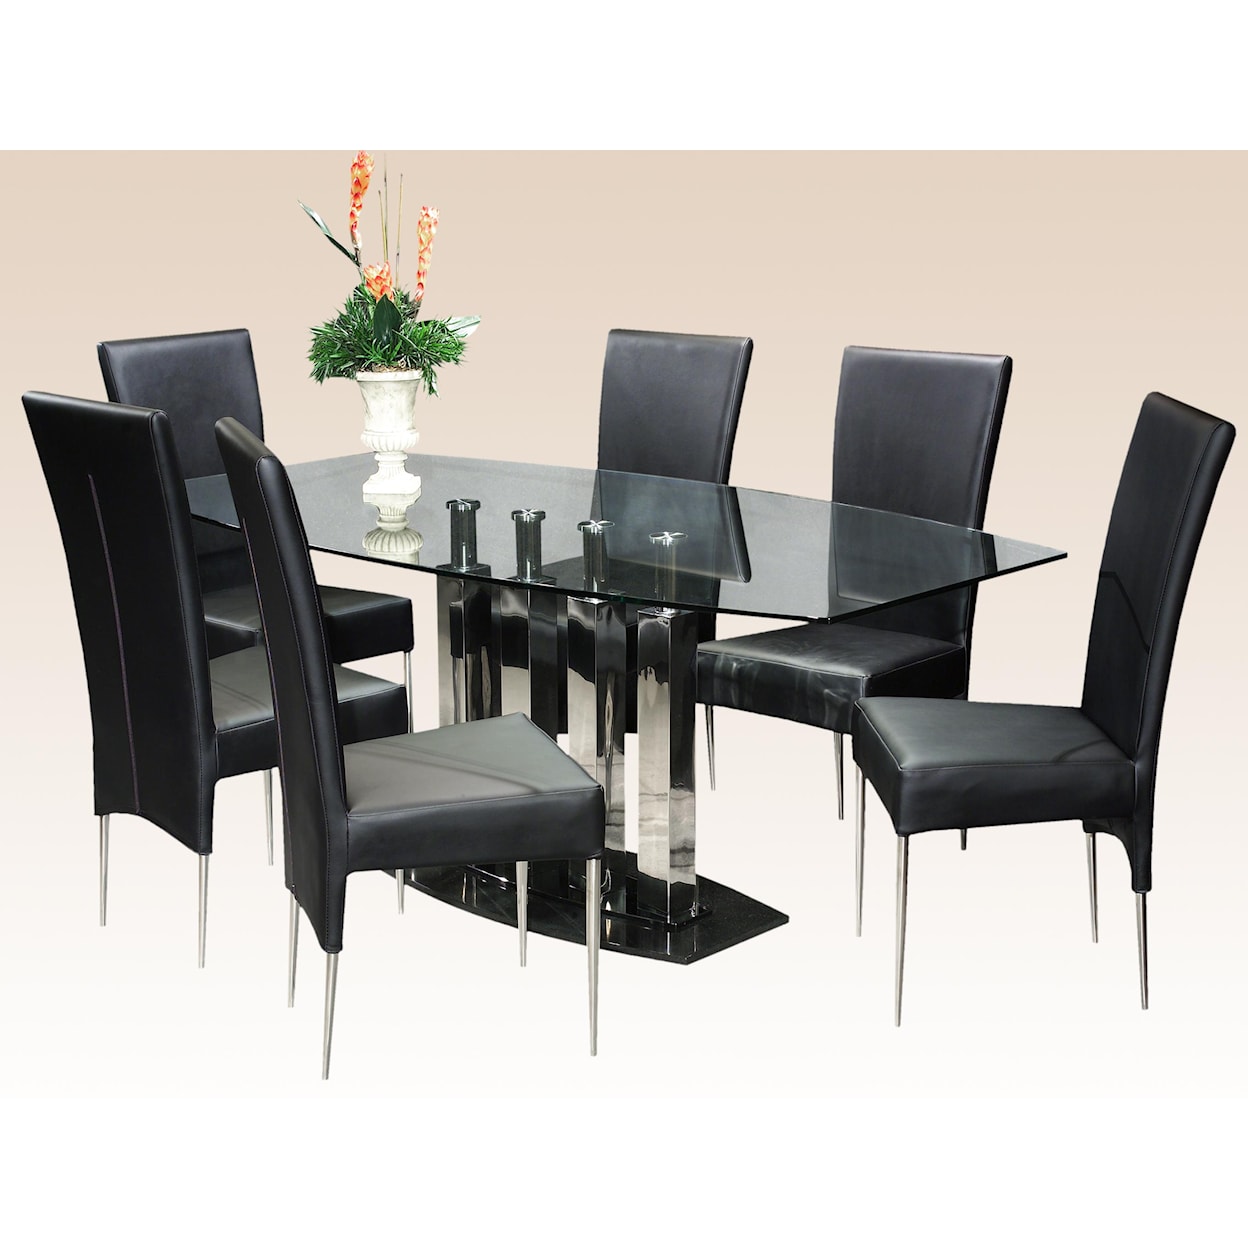 Chintaly Imports Cilla 7 Piece Table and Chair Set